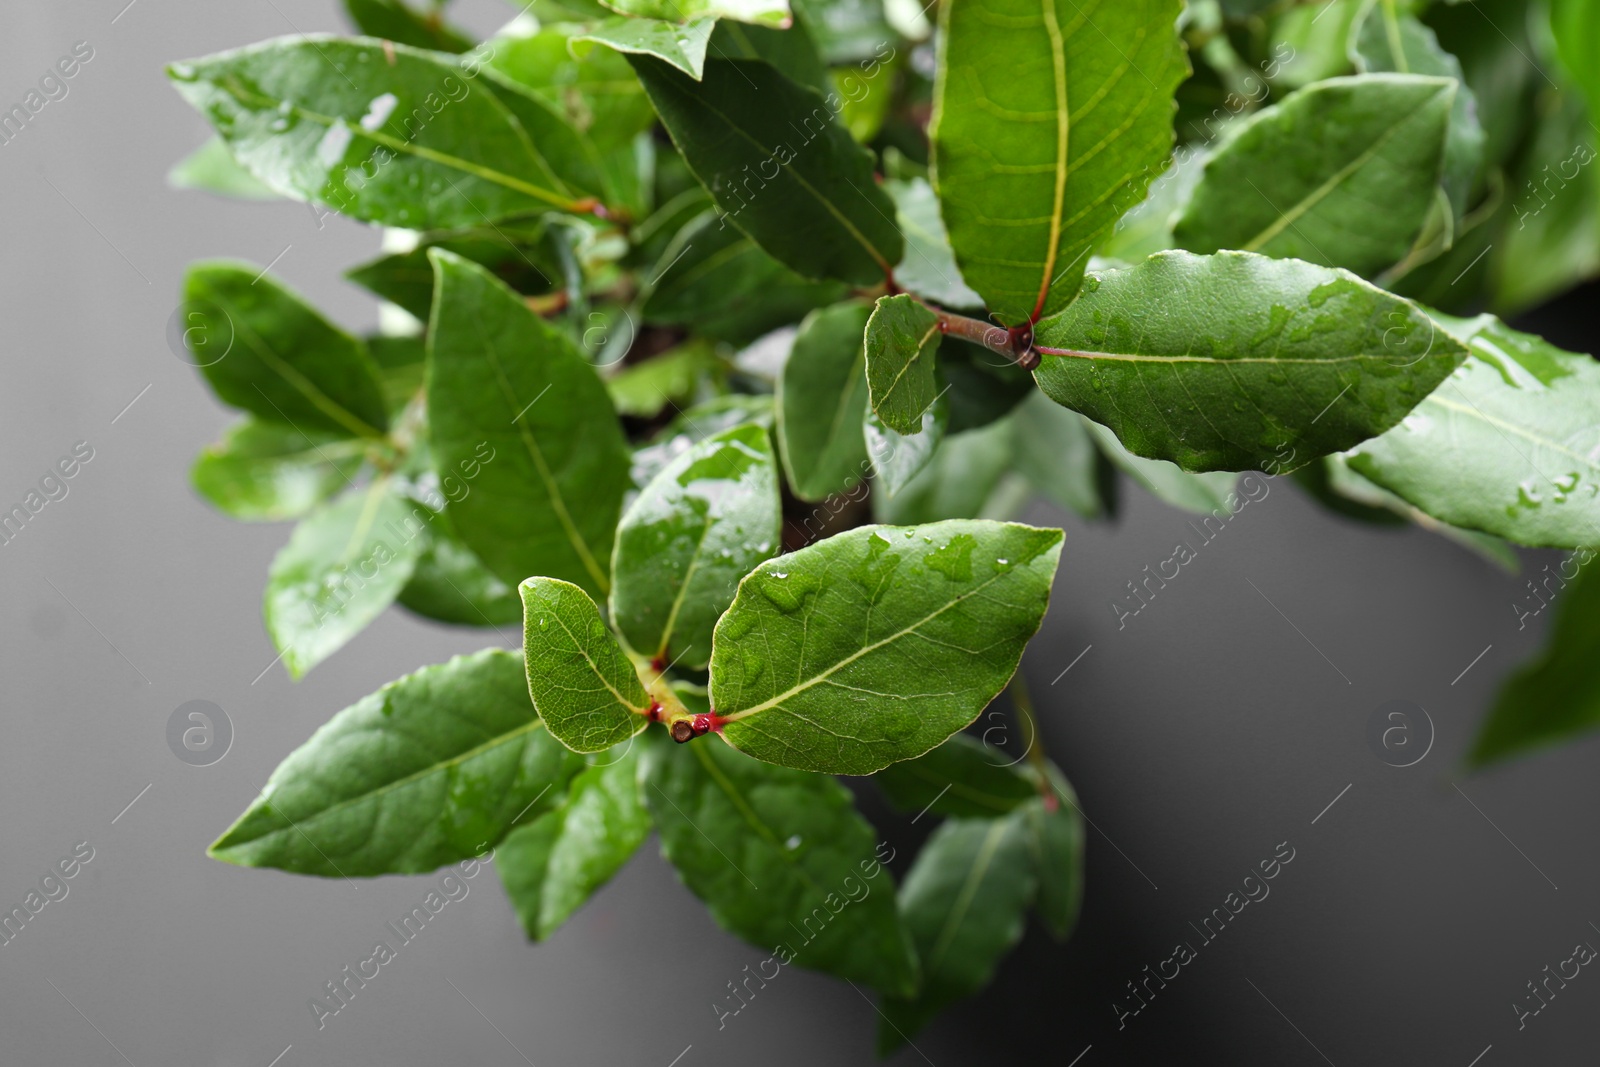 Photo of Bay tree with green leaves growing on grey background, closeup